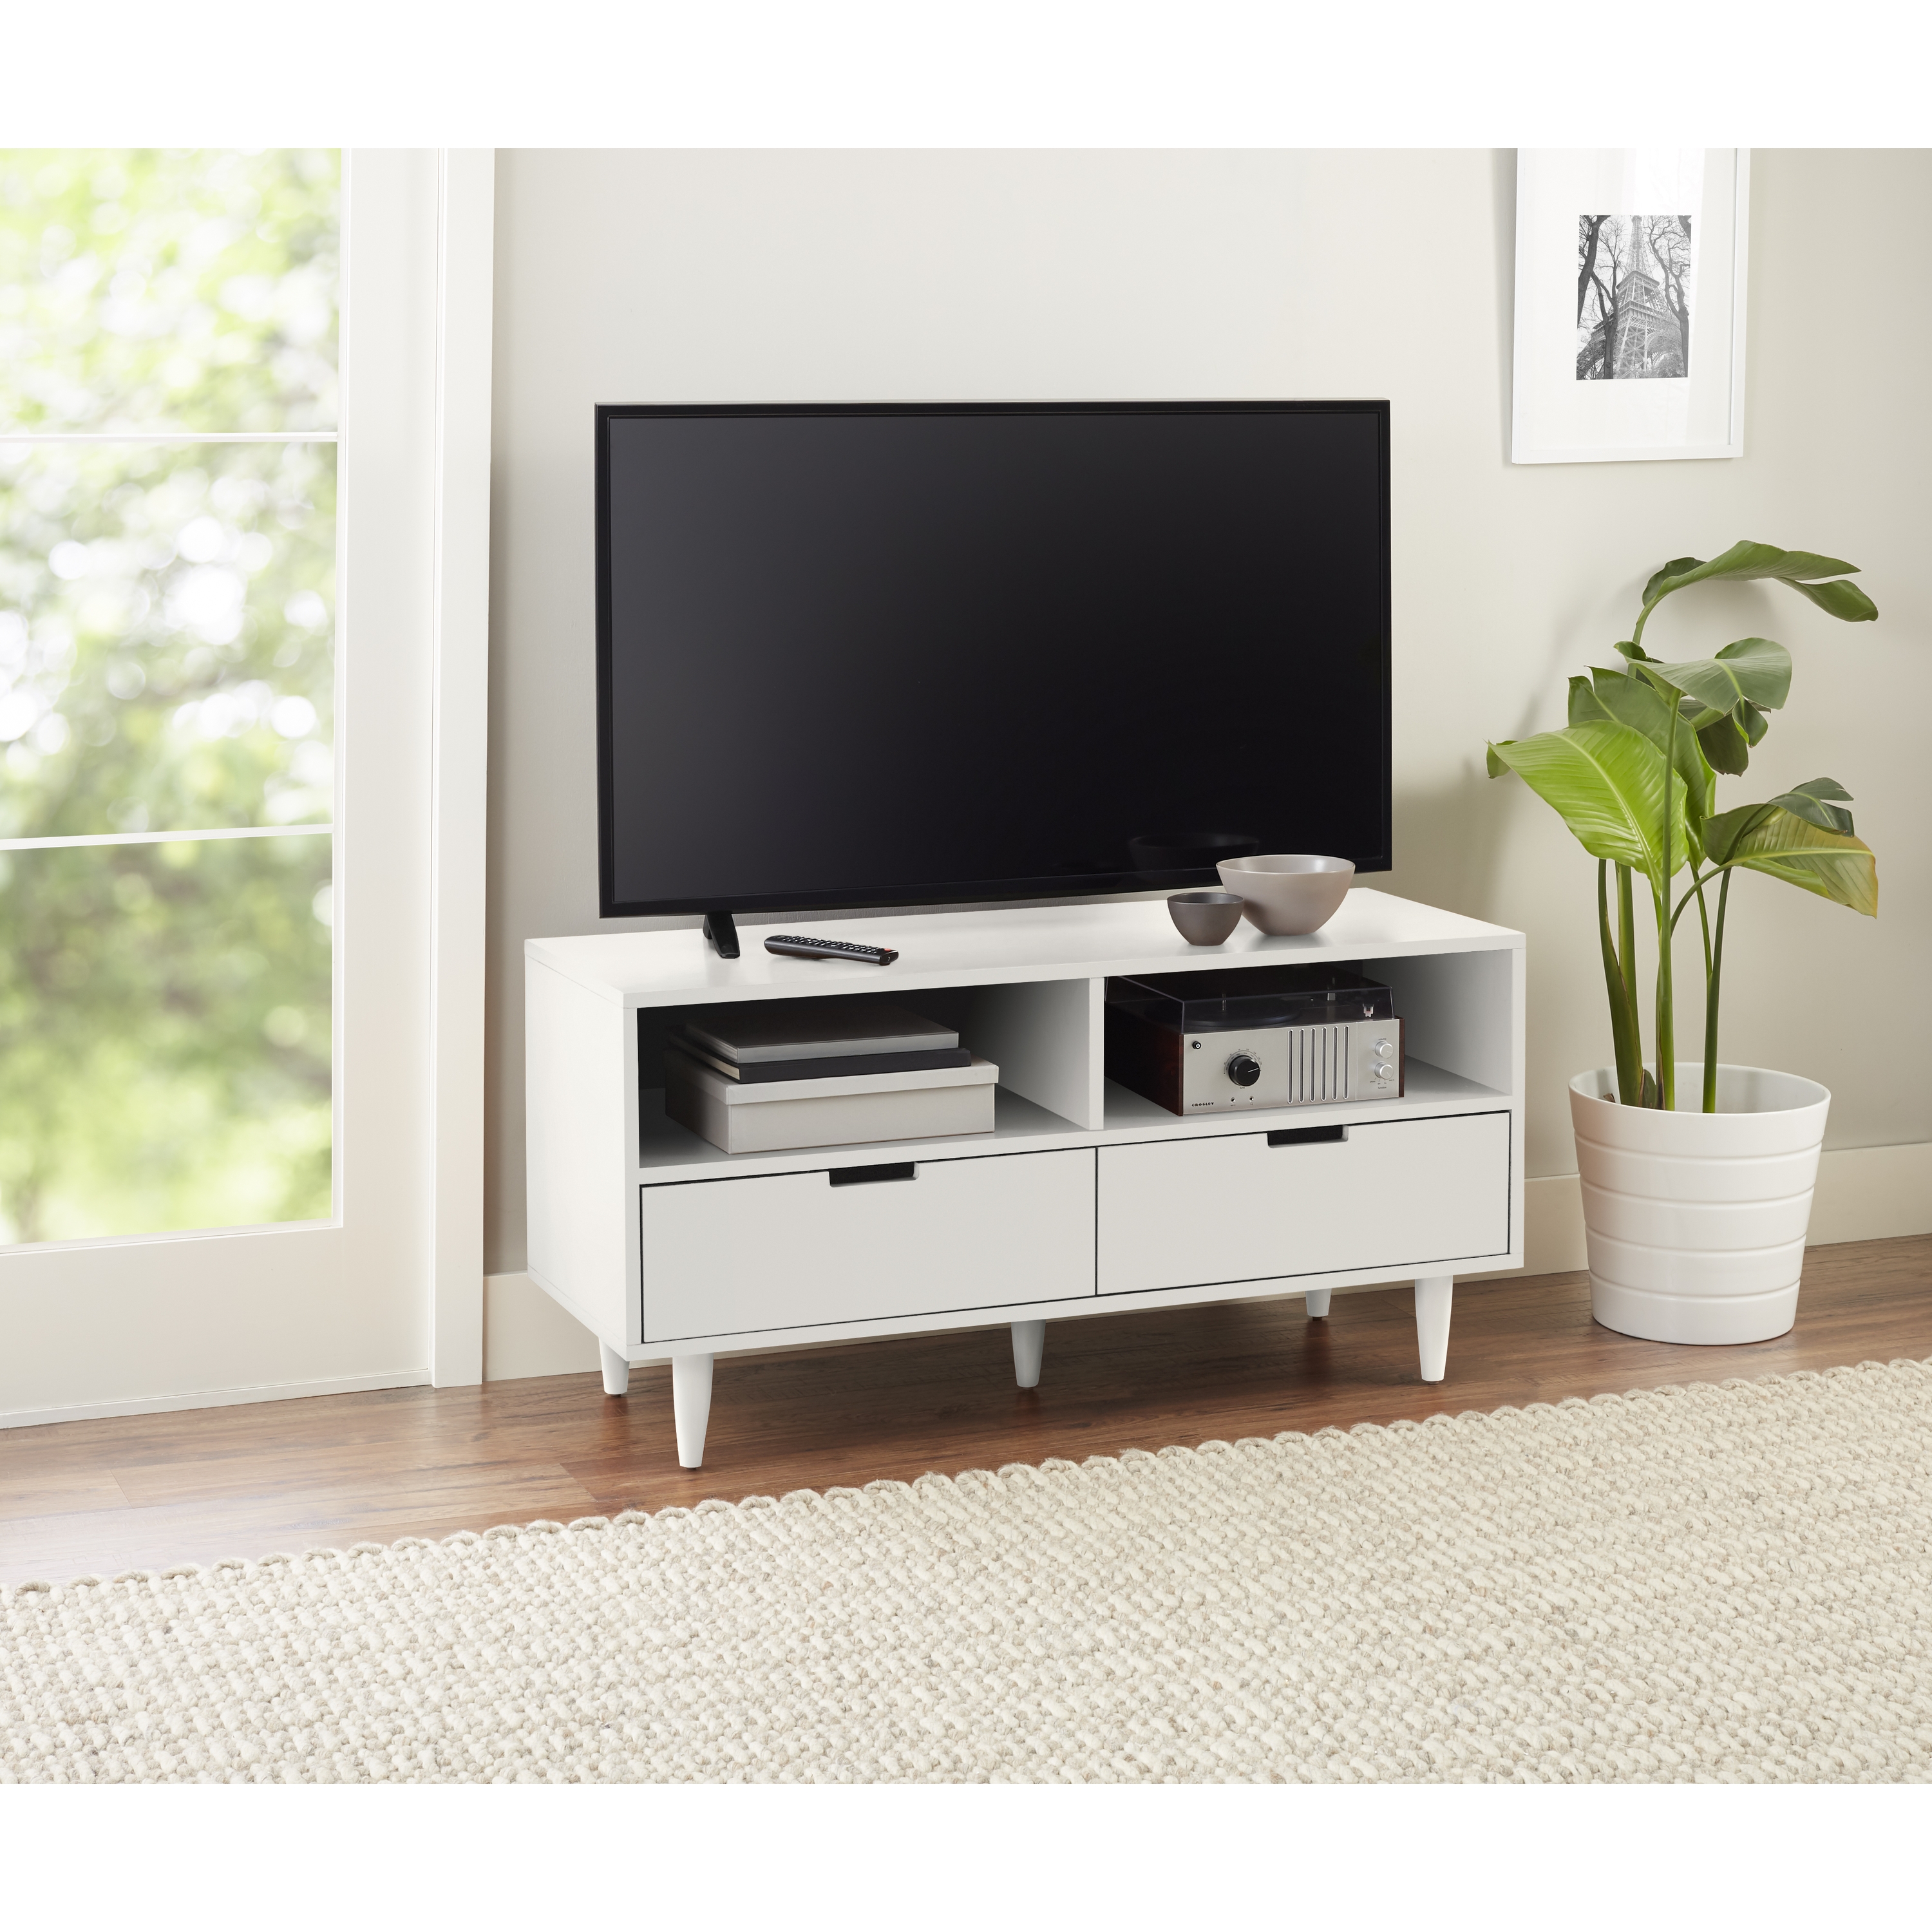 Better Homes & Gardens Flynn TV Stand for TVs Up to 55", White - image 1 of 2